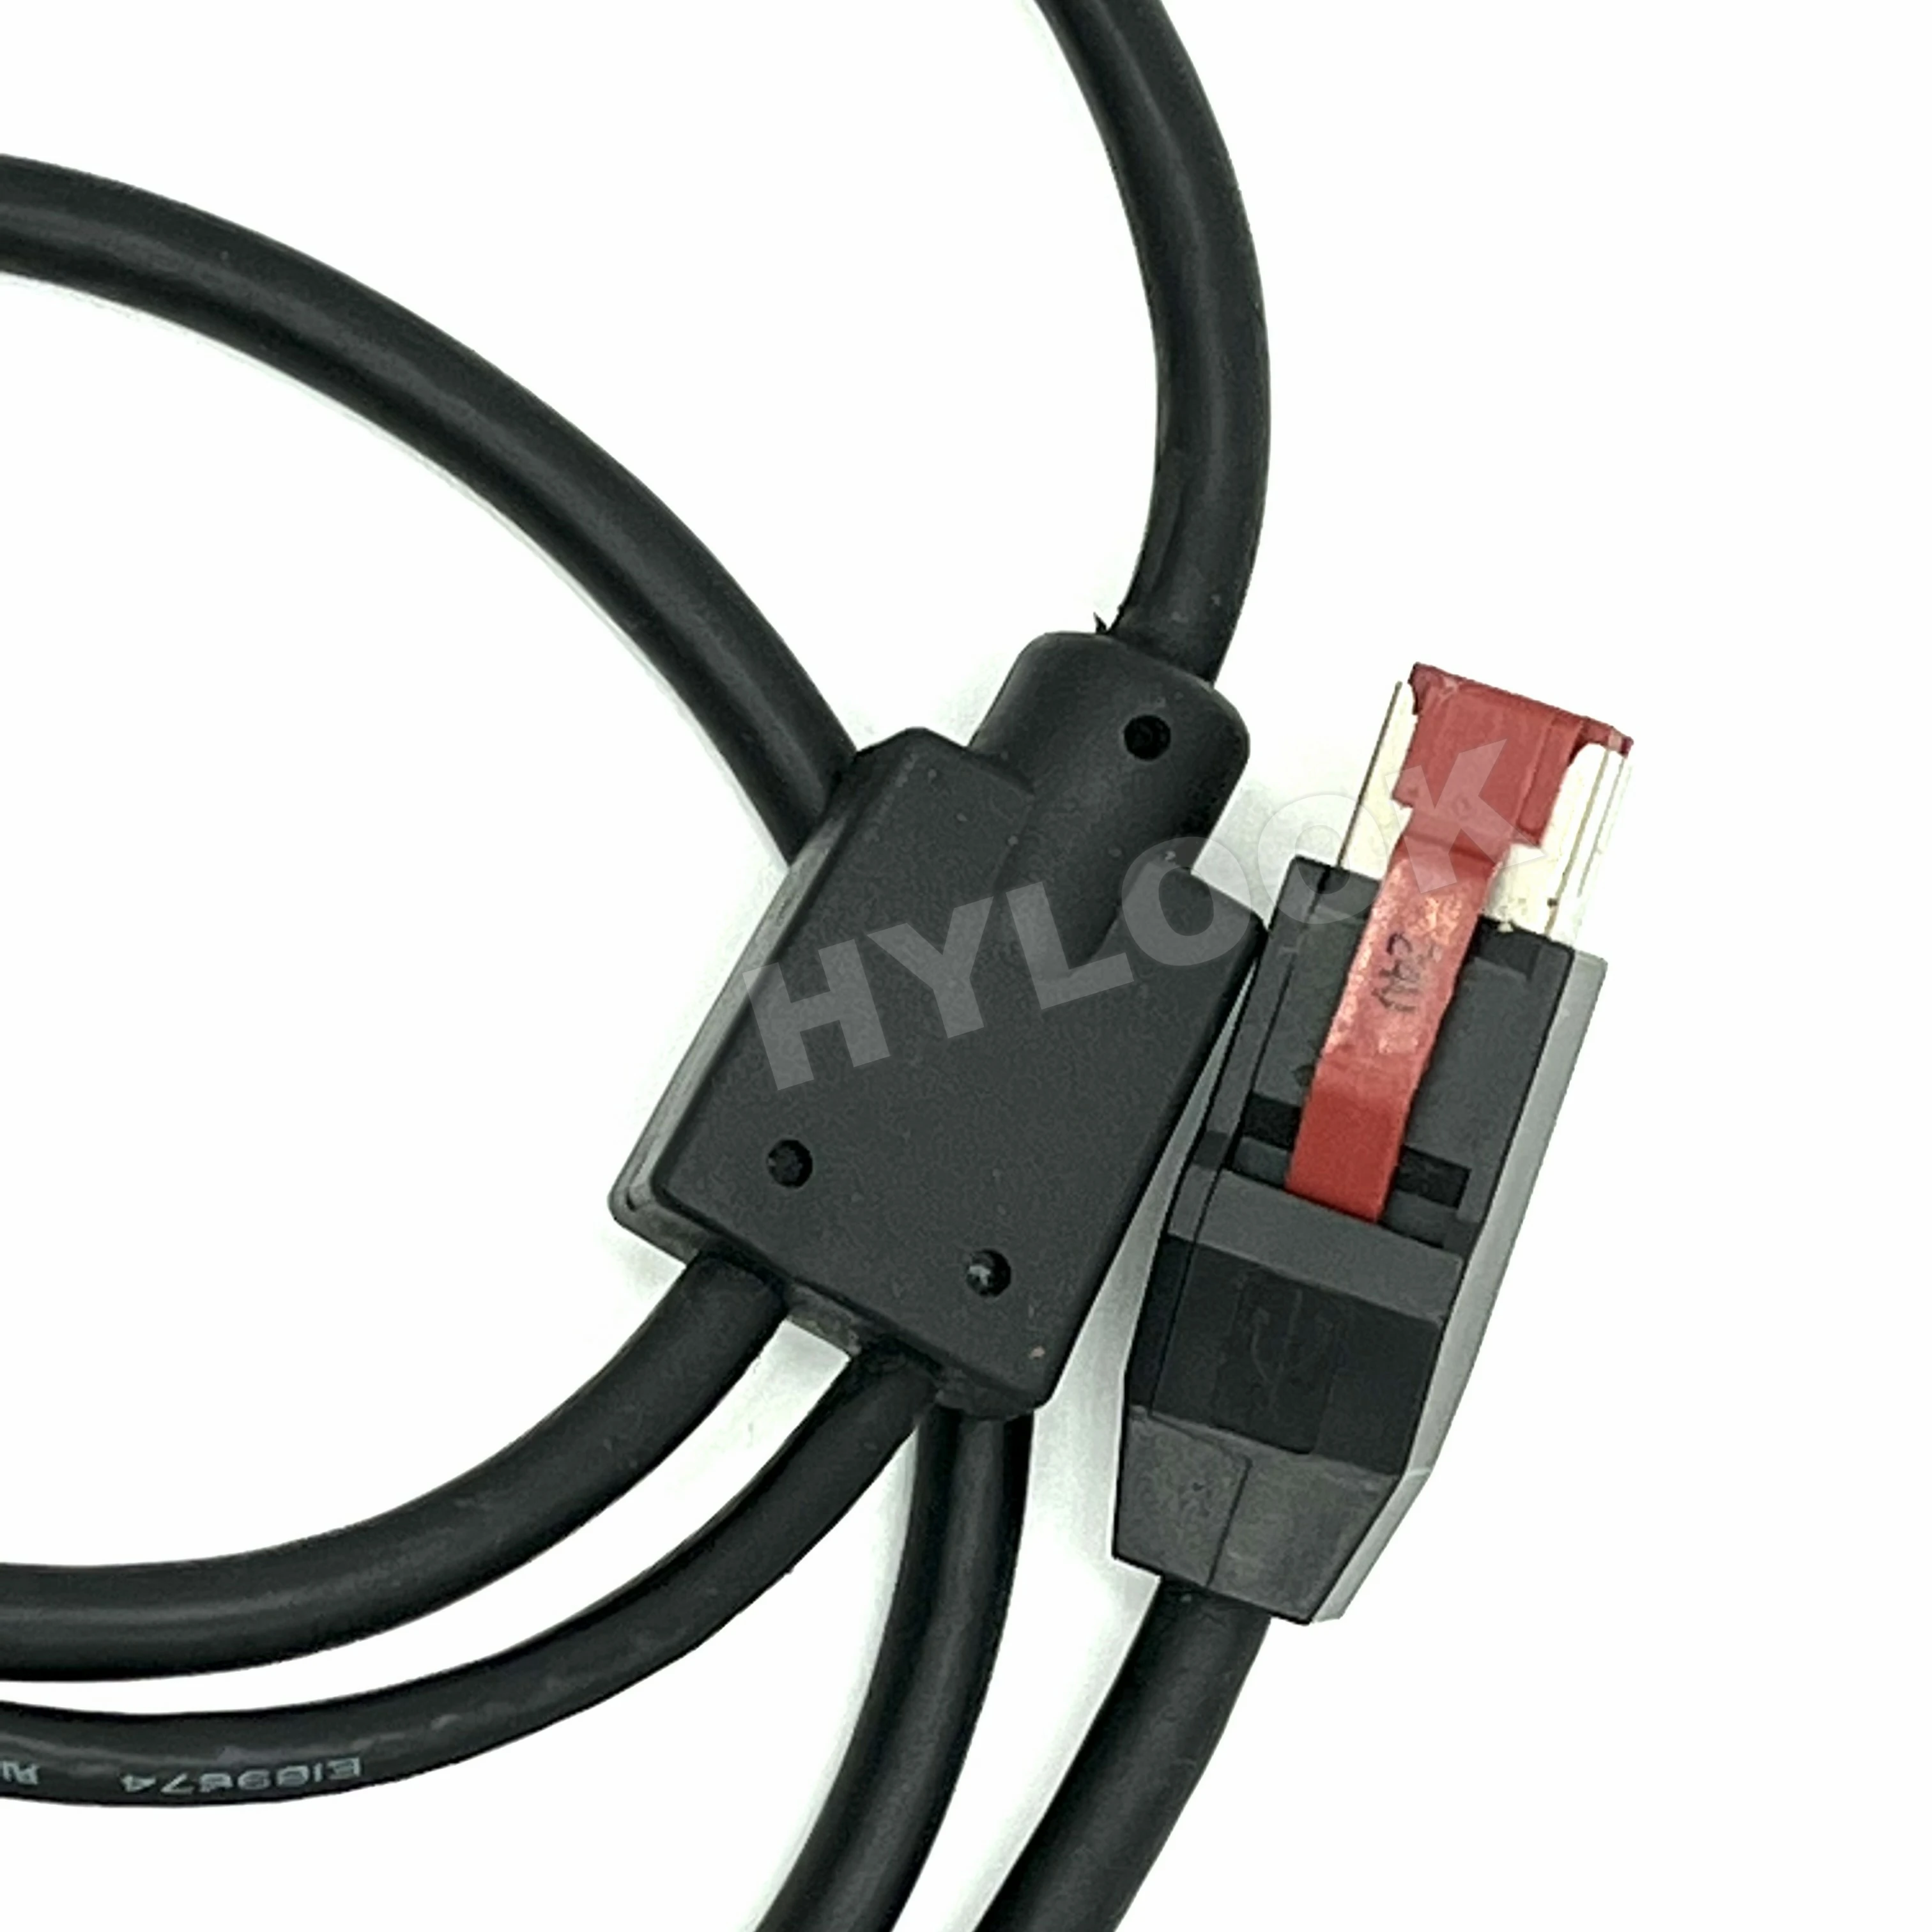 24v Powered Usb Cable To Hosiden Power For Epsonpos Printers Buy 24v Powered Usb Cable To 8663